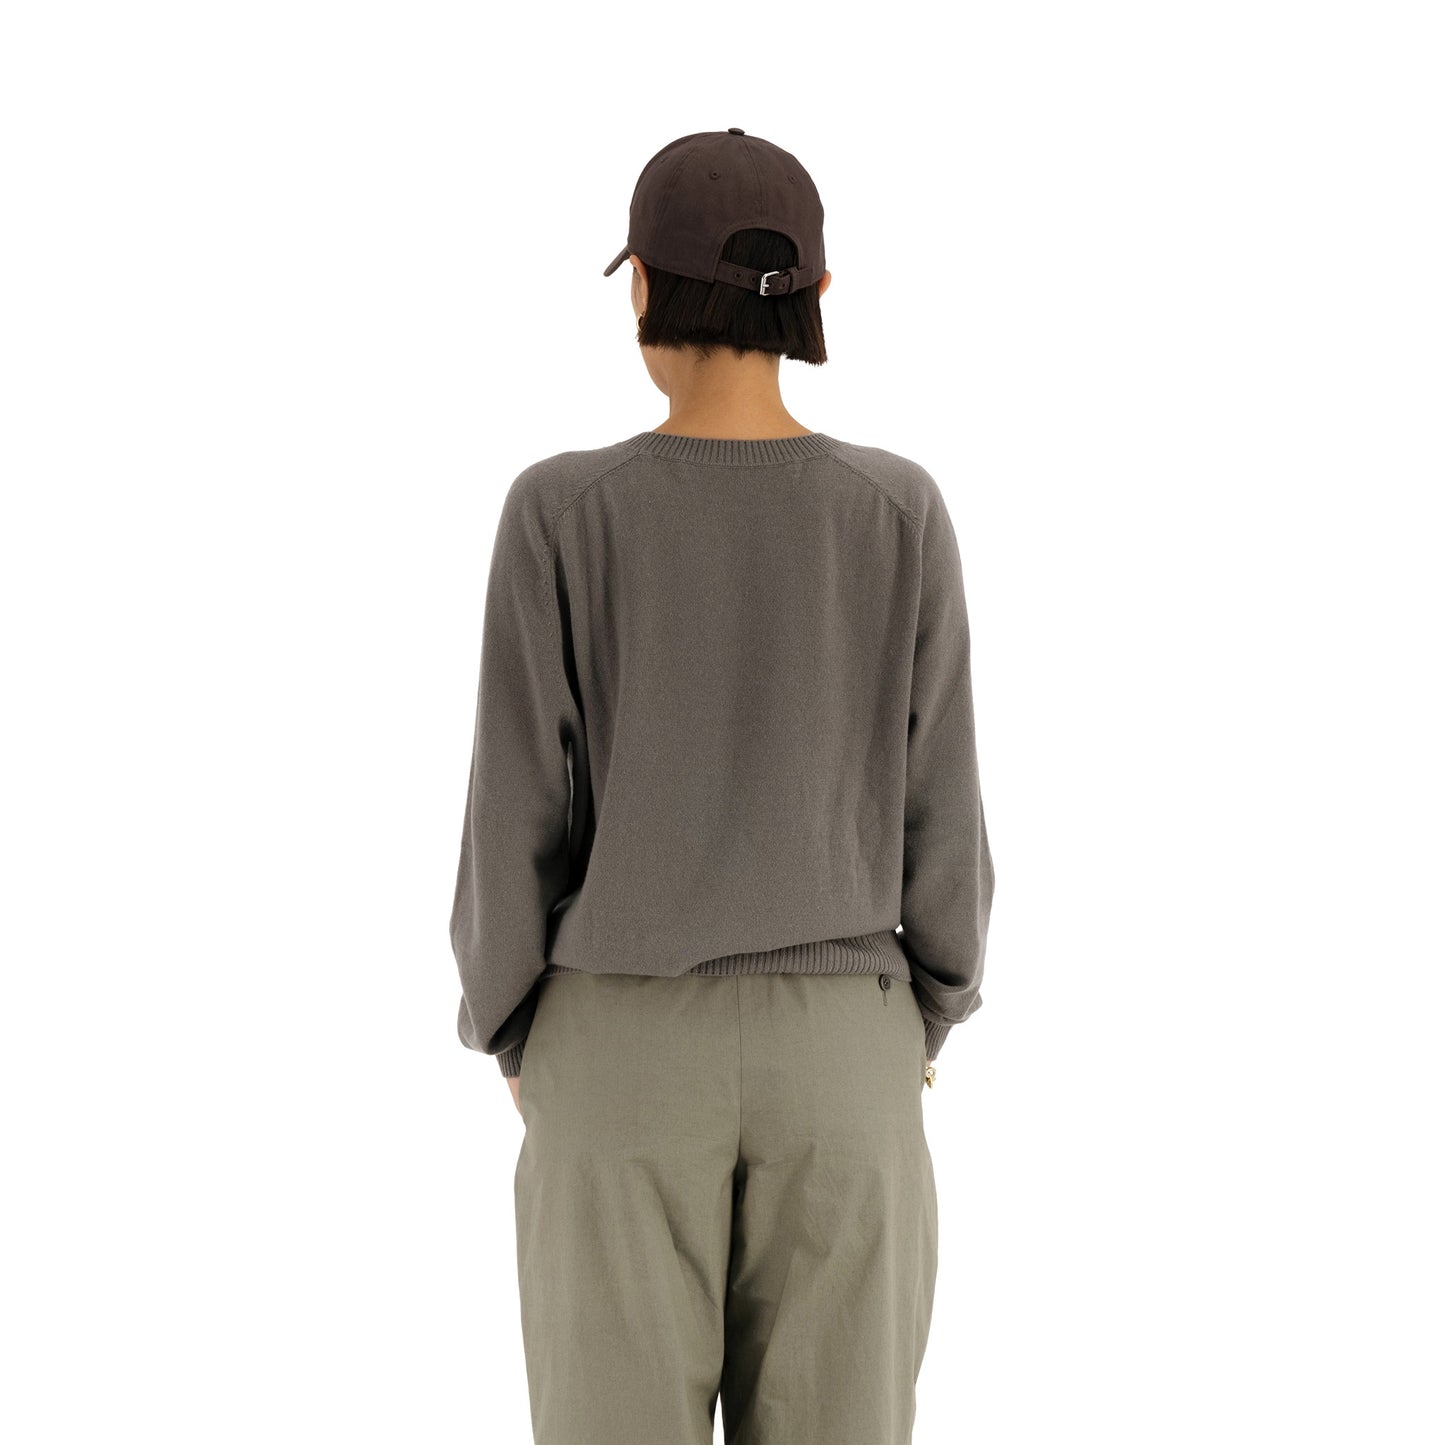 Ed Unlined Cotton Drawstring Trousers Weimaraner Grey